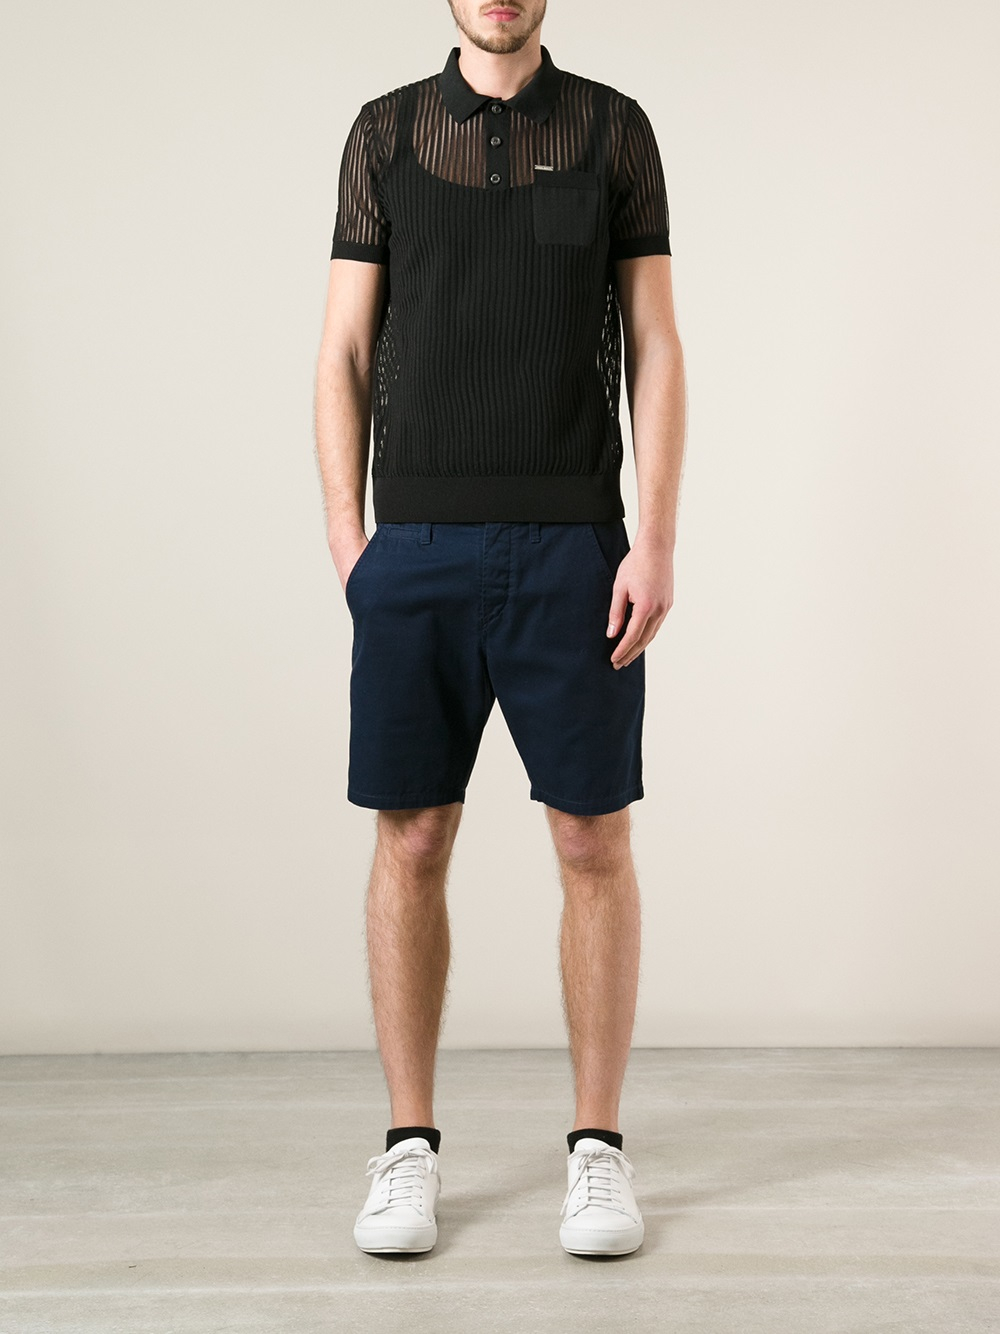 DSquared² Sheer Ribbed Polo Shirt in Black for Men - Lyst